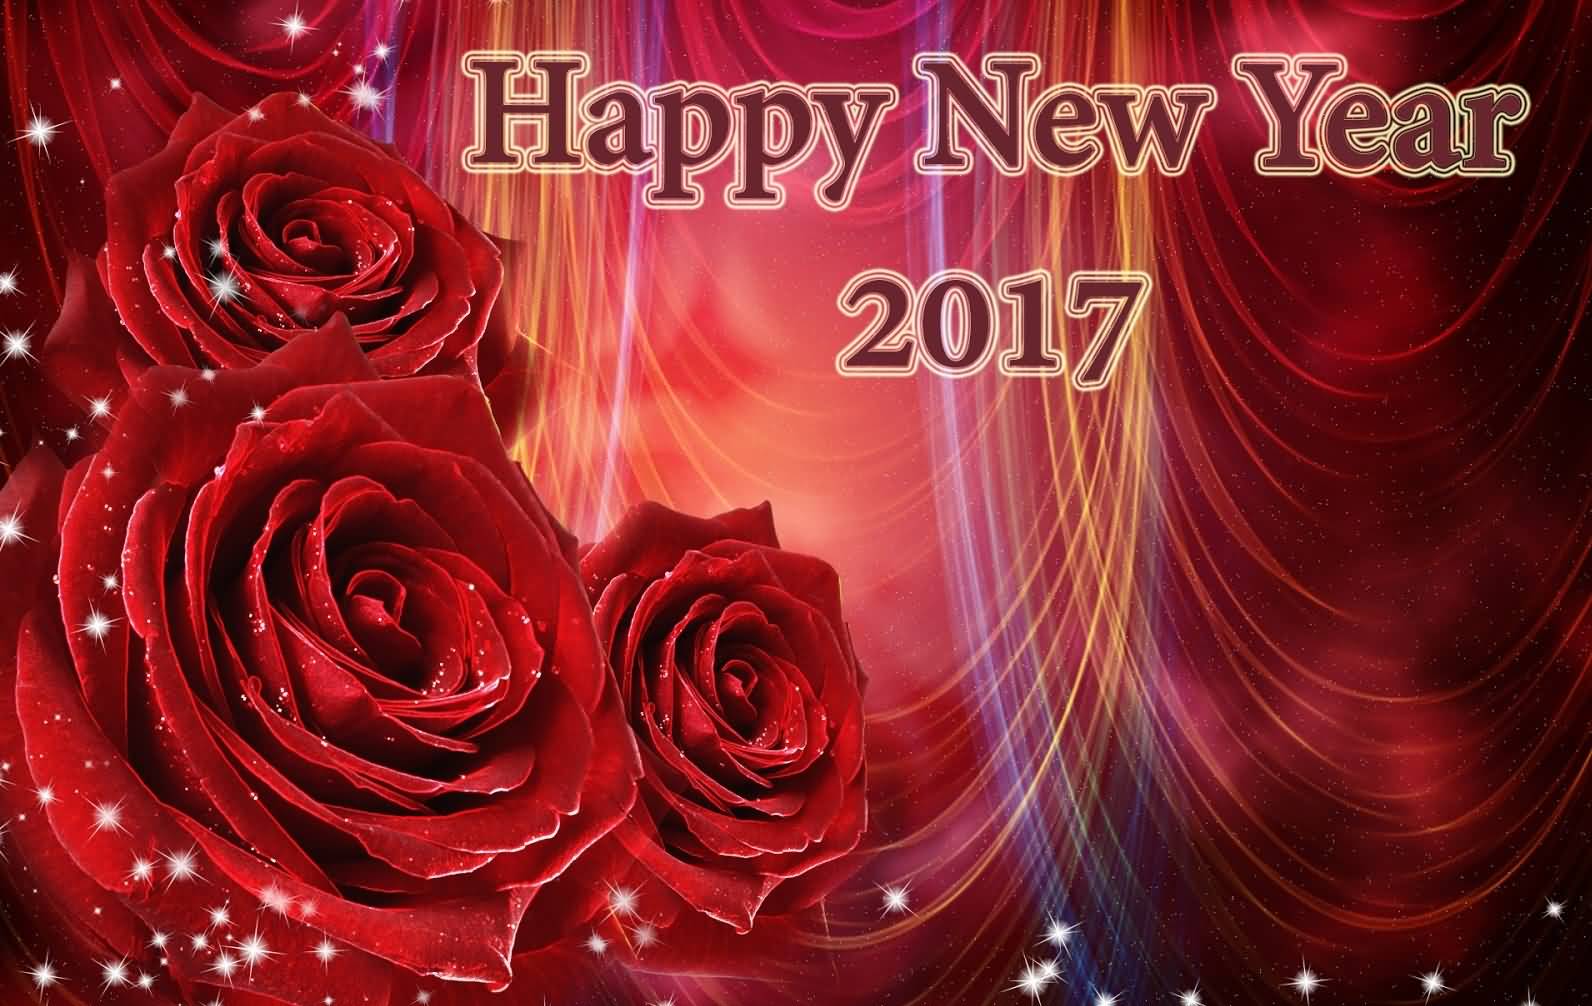 Hapy New Year 2017 Rose Flowers Picture